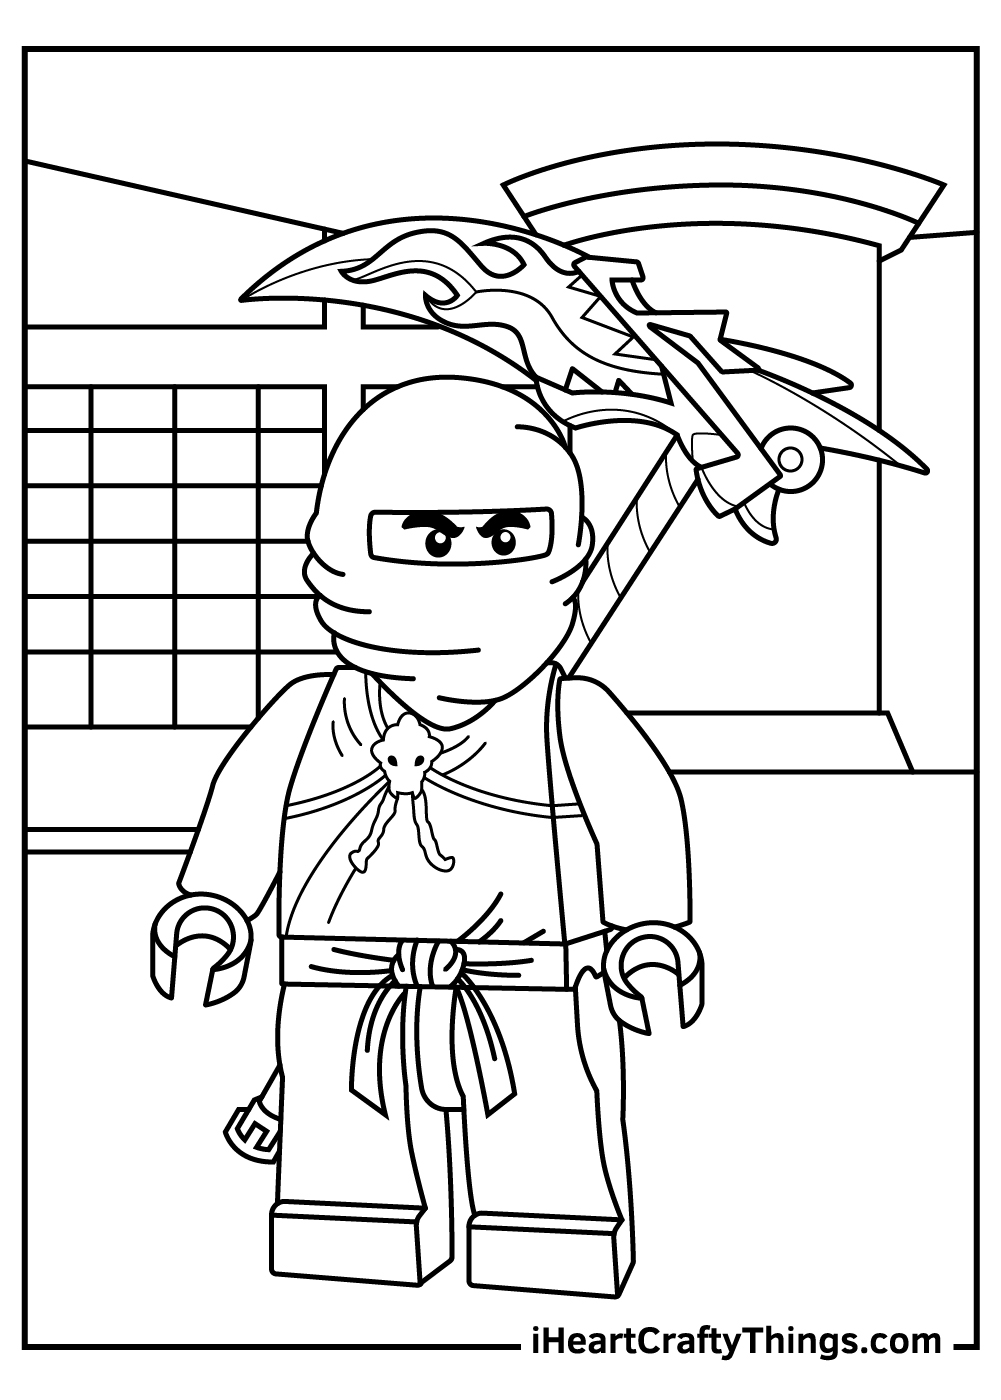 Printable Lego Ninjago Coloring Pages Updated 21